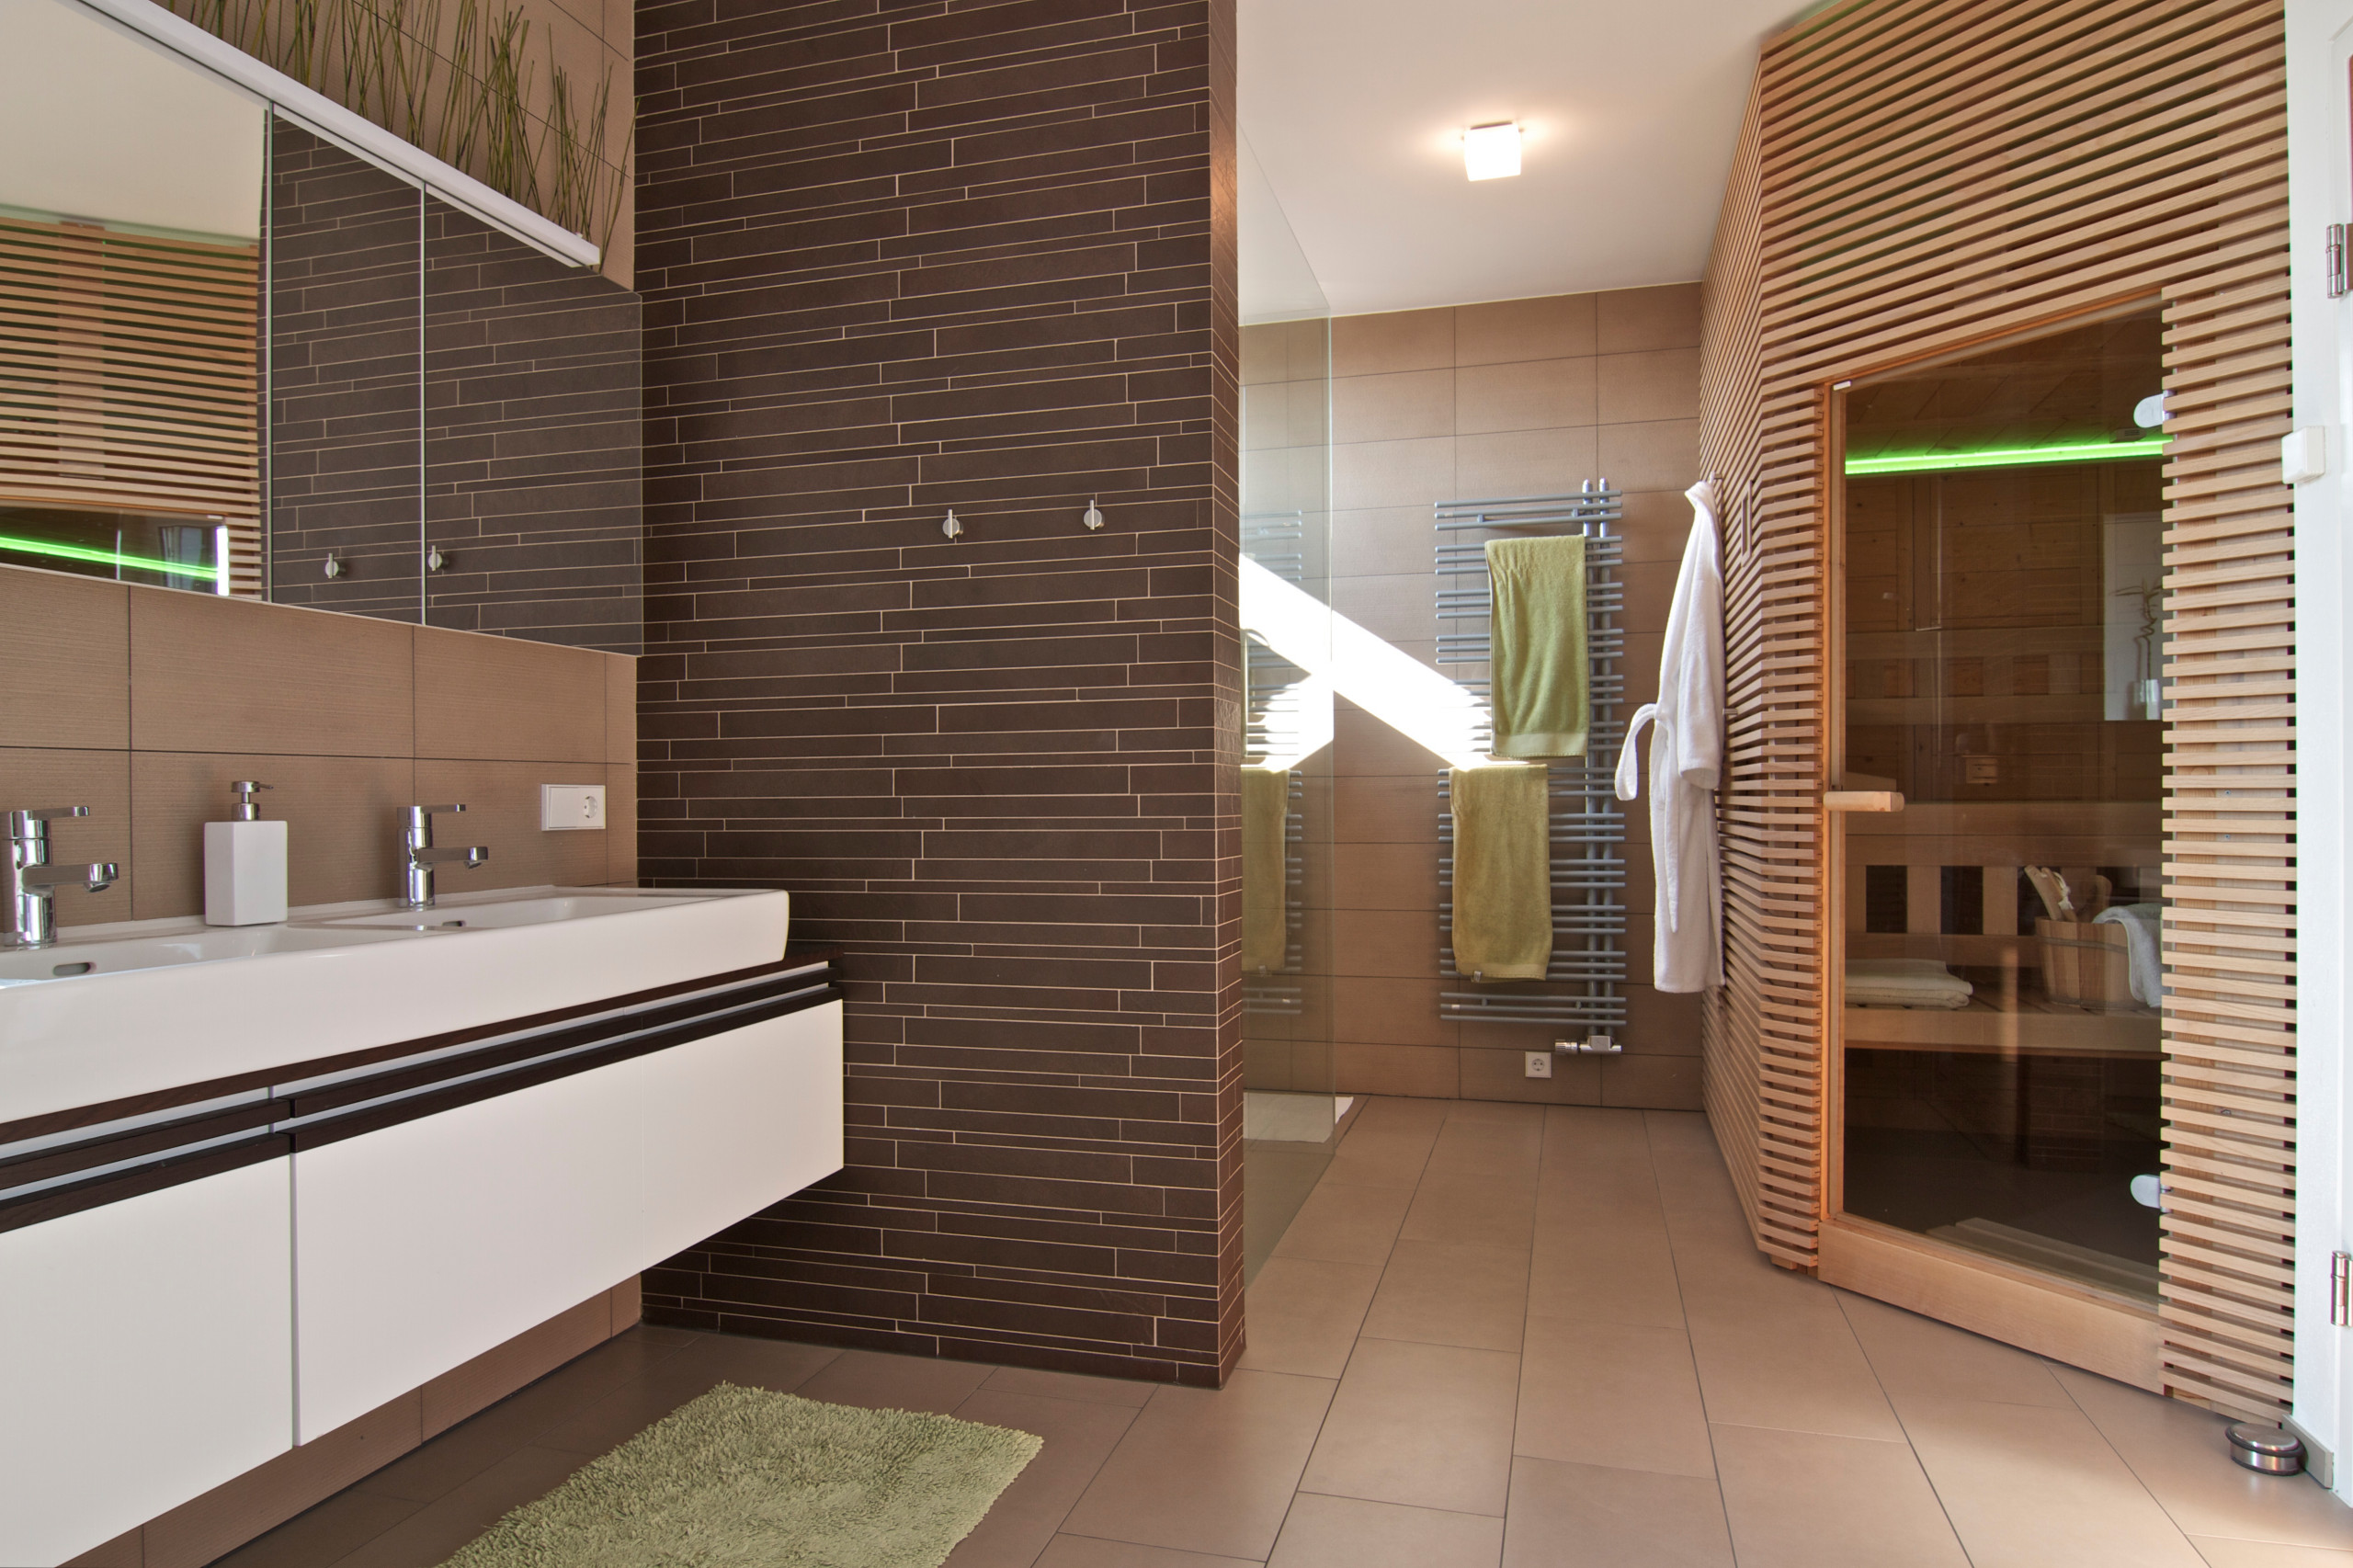 Control Sauna with iPhone - Contemporary - Bathroom - Other - by Loxone  Smart Home | Houzz